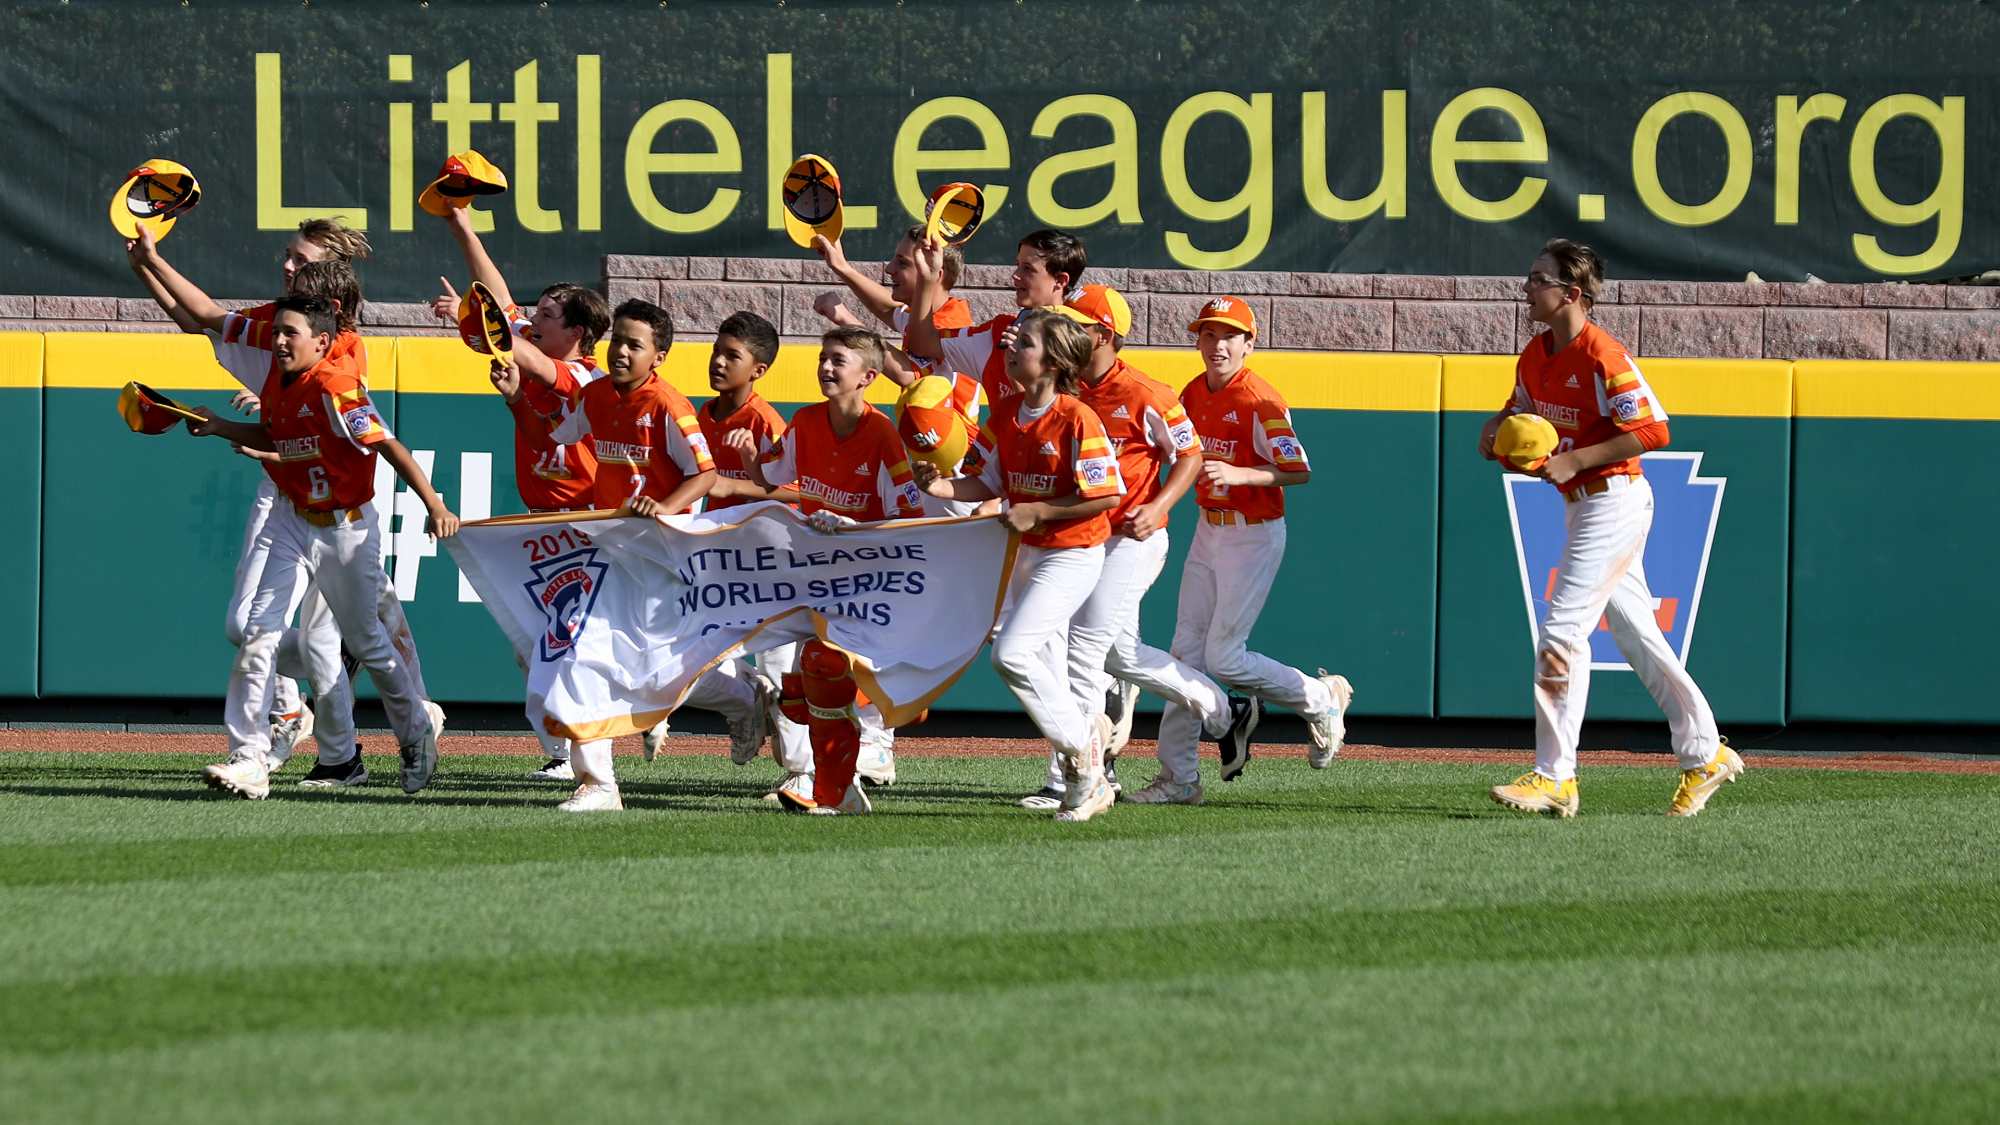 2021 Little League World Series: Scores, stats, history and more